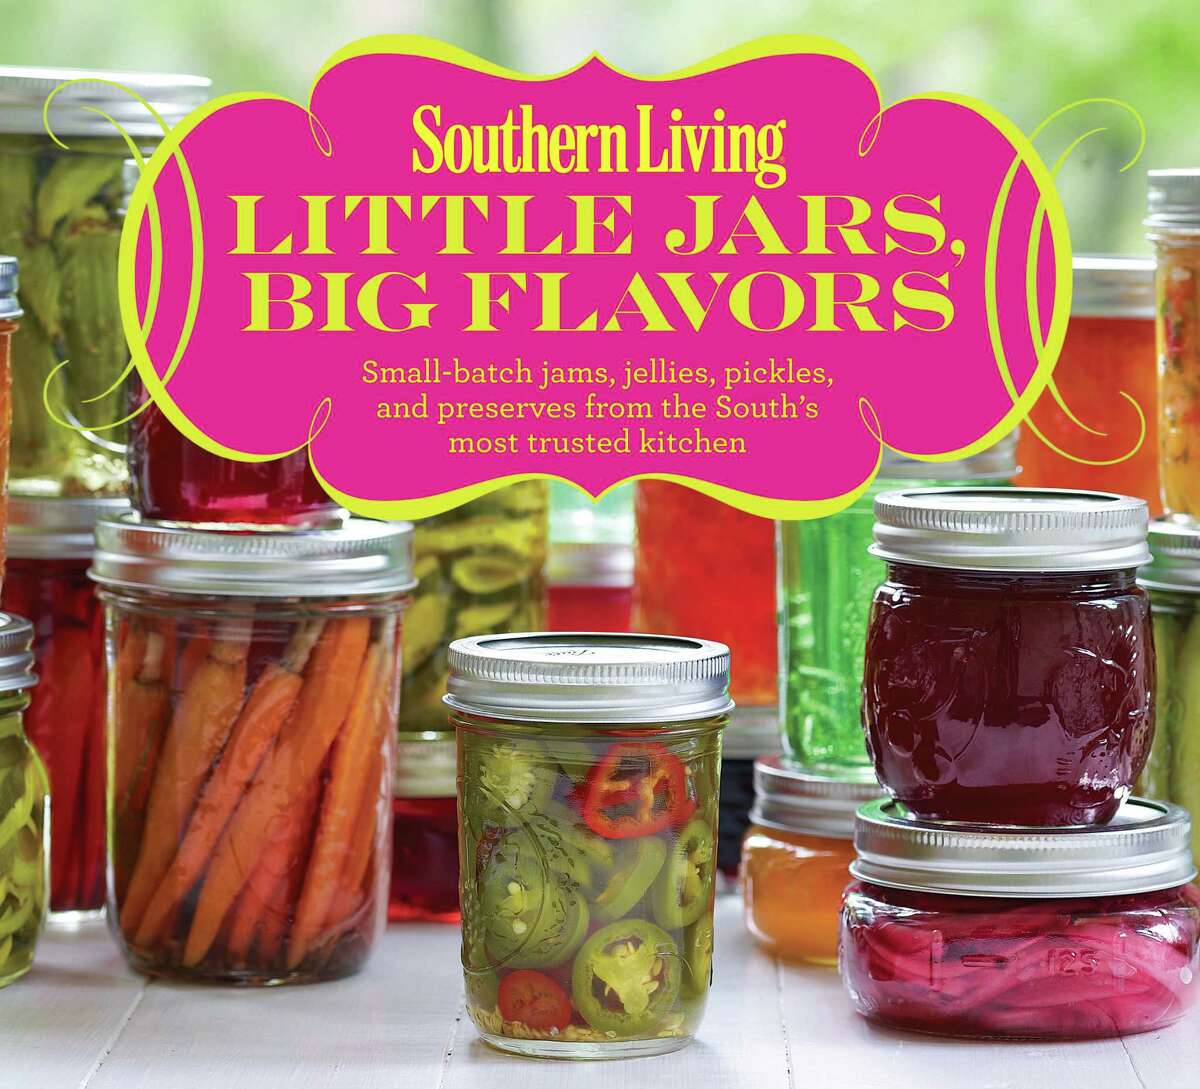 Cover: "Southern Living Little Jars, Big Flavors" (Oxmoor House)